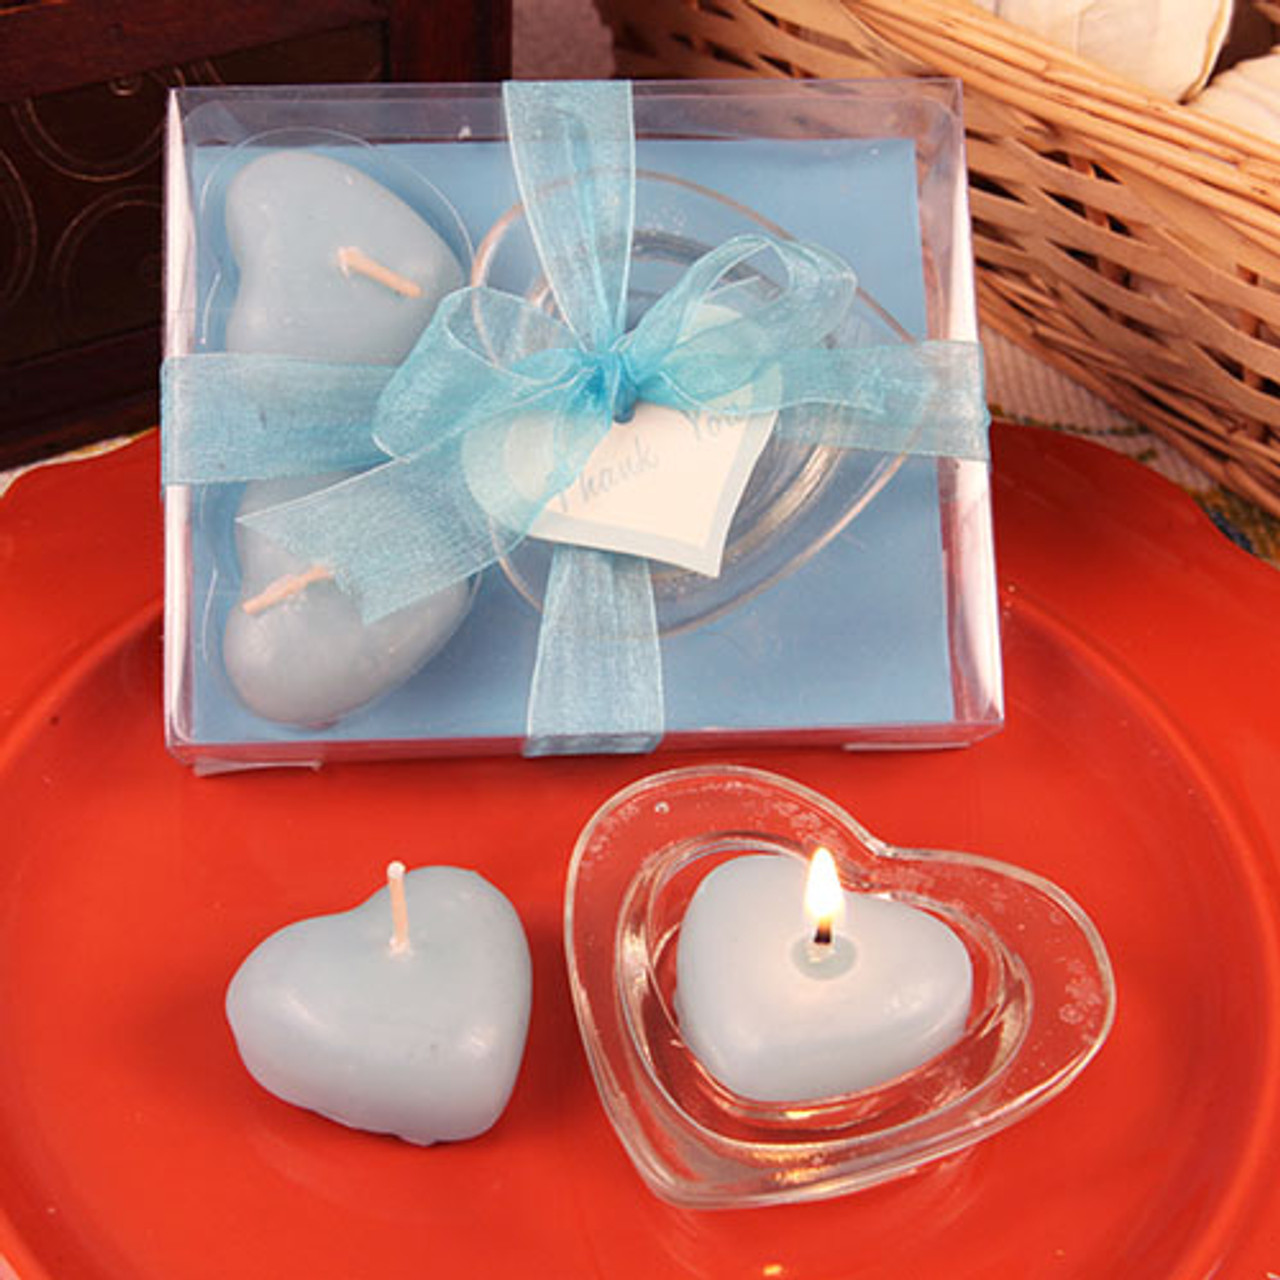 Three Little Hearts Heart Shaped Purple Candles With Tray